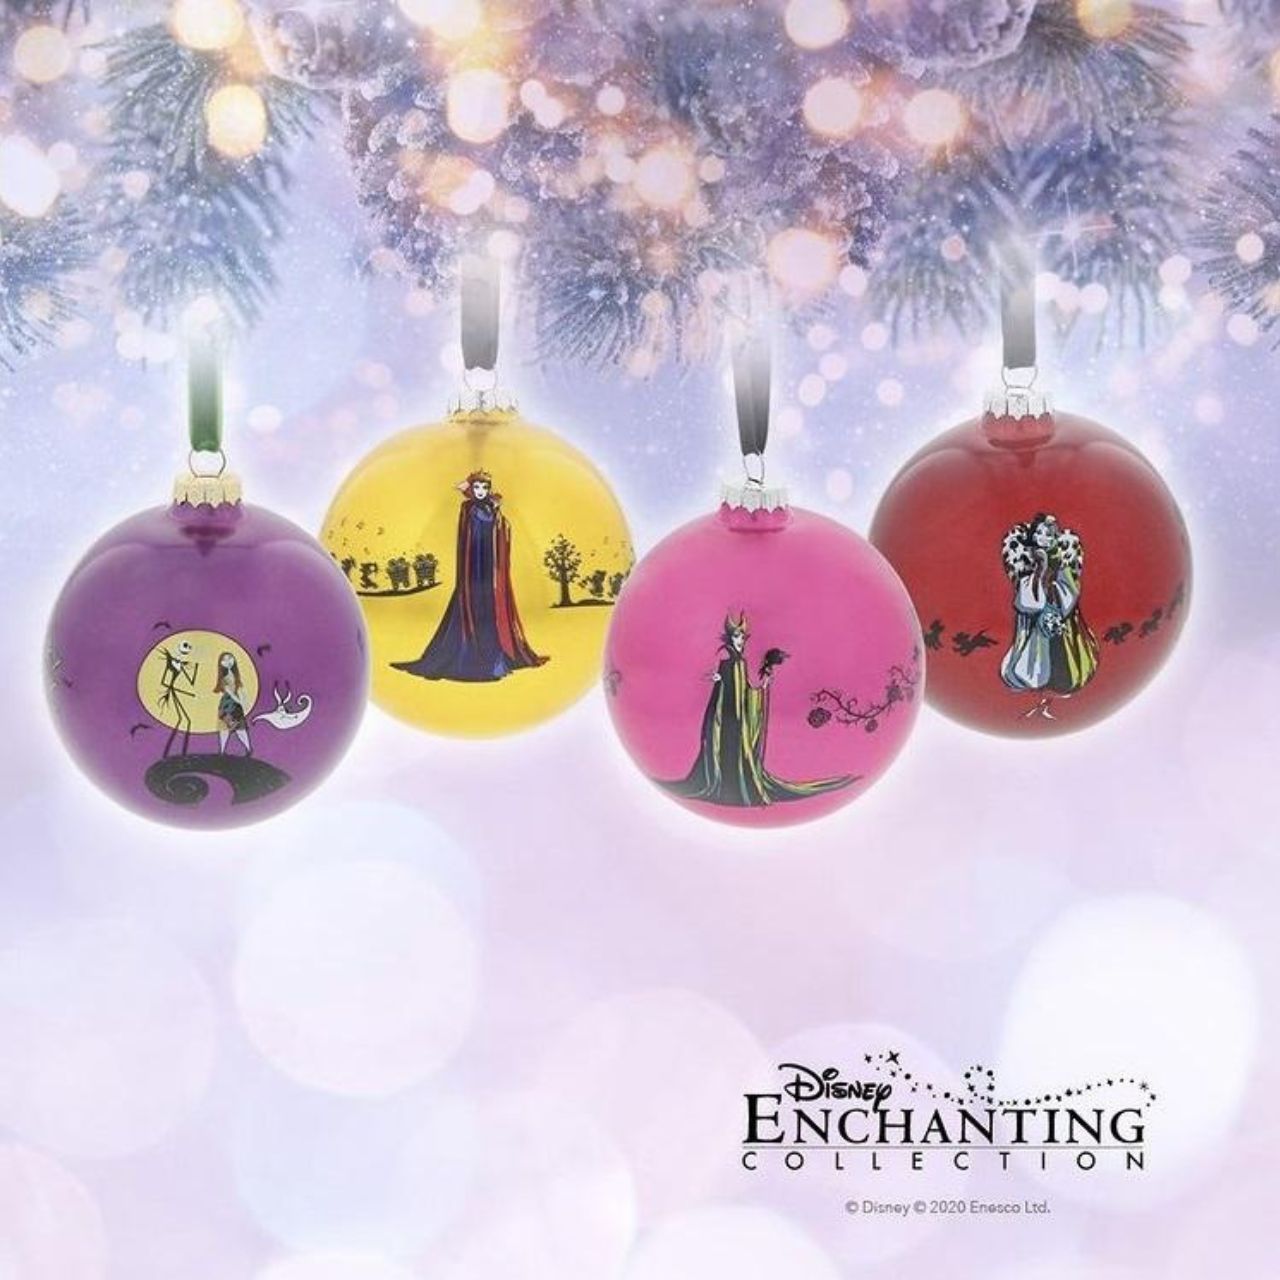 Disney Nightmare Before Christmas Bauble Festive Frights  You can choose to celebrate Halloween or Christmas with this Enchanting Disney glass bauble. Jack, Sally and Zero can be seen in this iconic, romantic Nightmare Before Christmas scene.